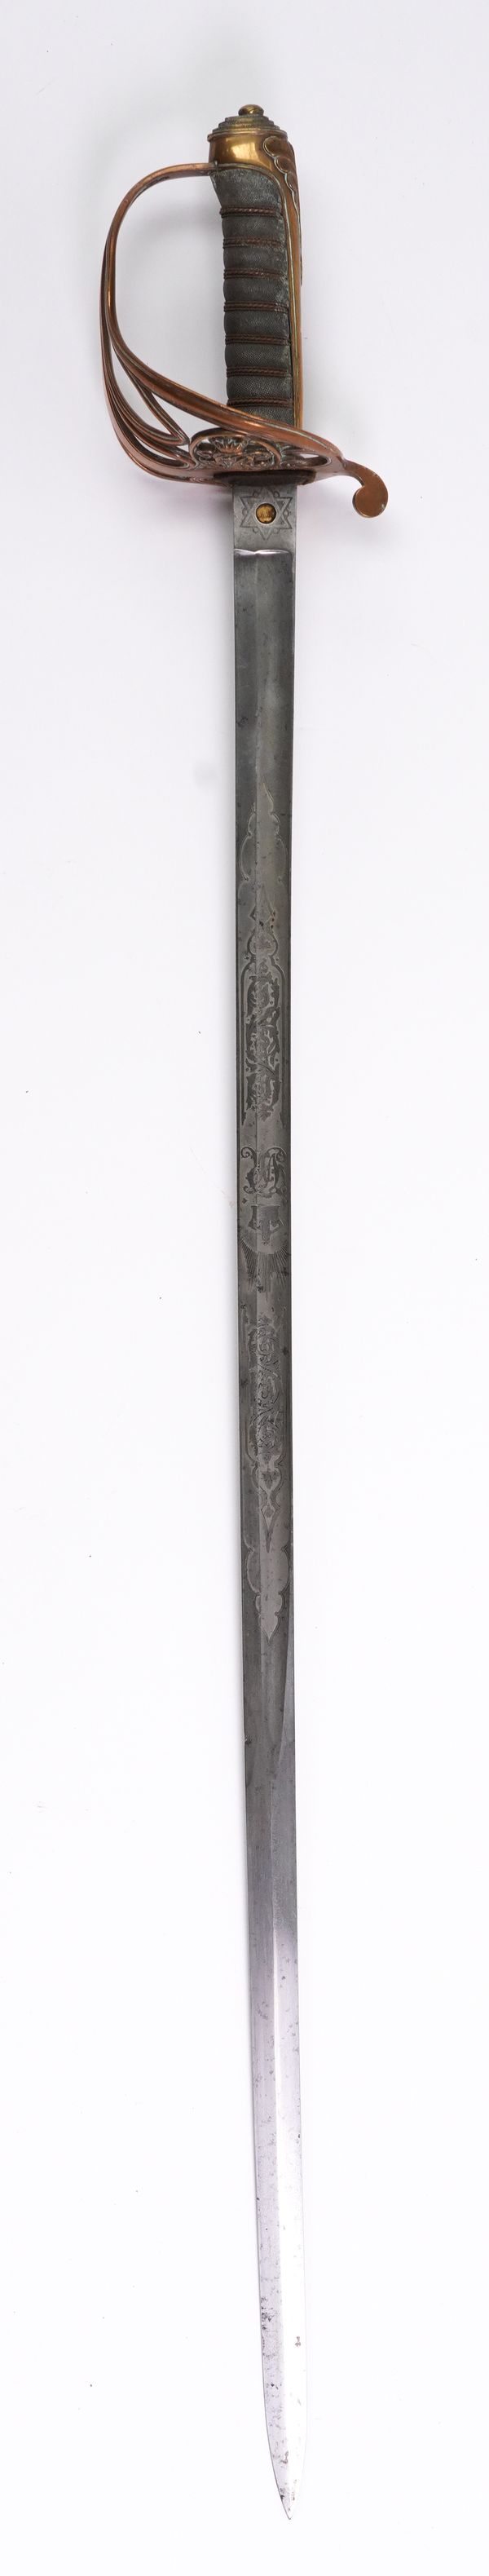 A VICTORIAN INFANTRY OFFICER’S SWORD BY HENRY WILKINSON